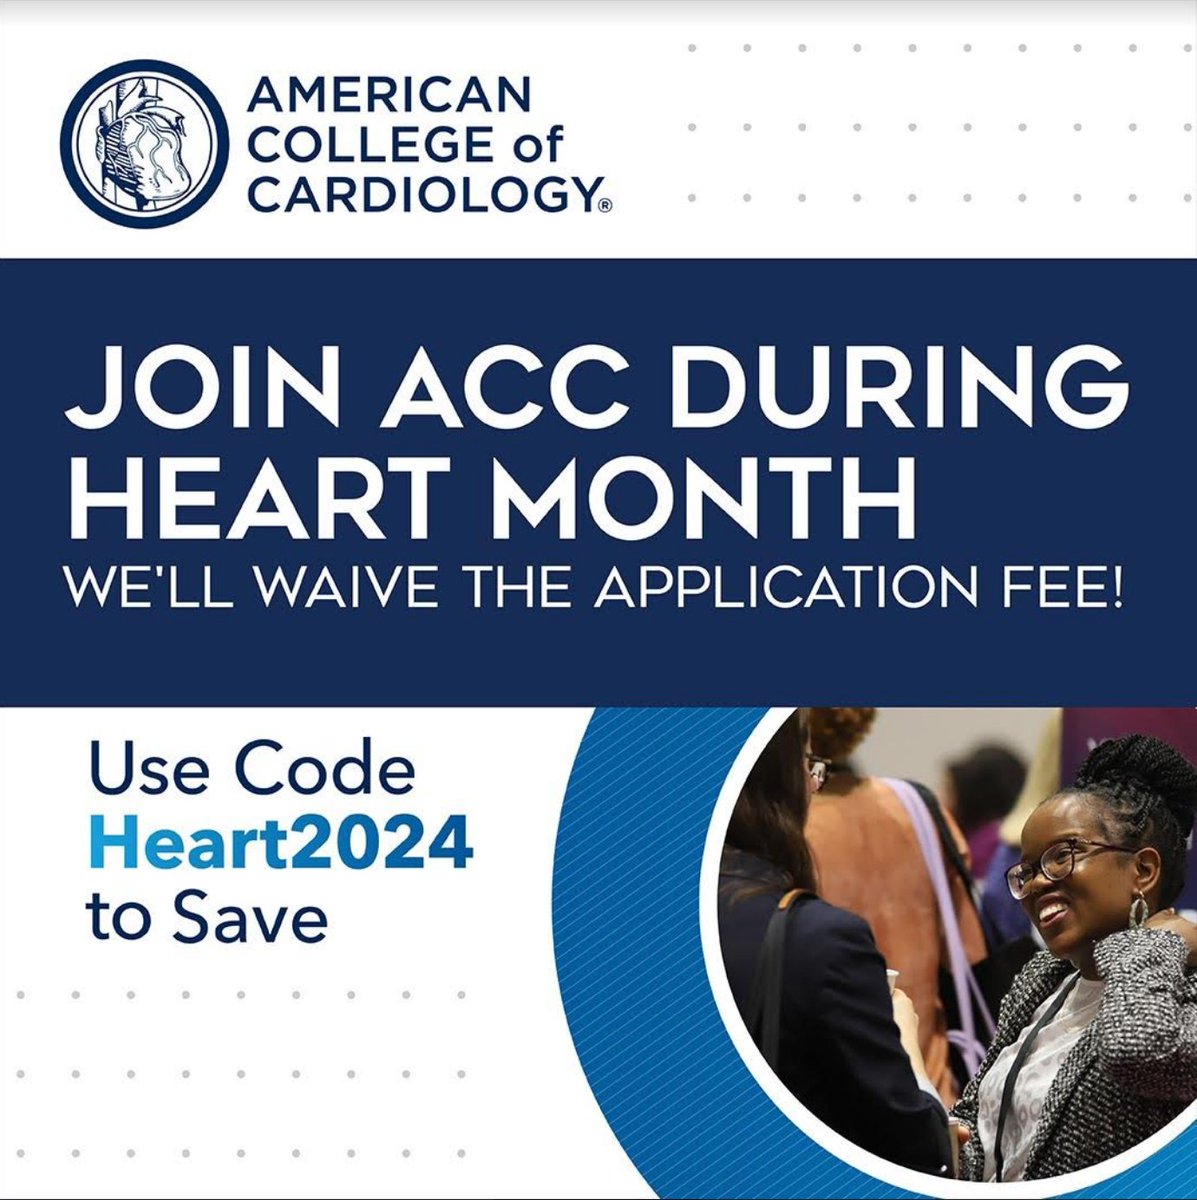 4 Days Left to Take Advantage! Please share with your colleagues and CVT members! Become an ACC member during Heart Month using code HEART2024 & we’ll waive your application fee! Offer expires Feb. 29 @ACCinTouch @Andrea_Price317 @beaverspharmd @VietHeartPA @DrMarthaGulati